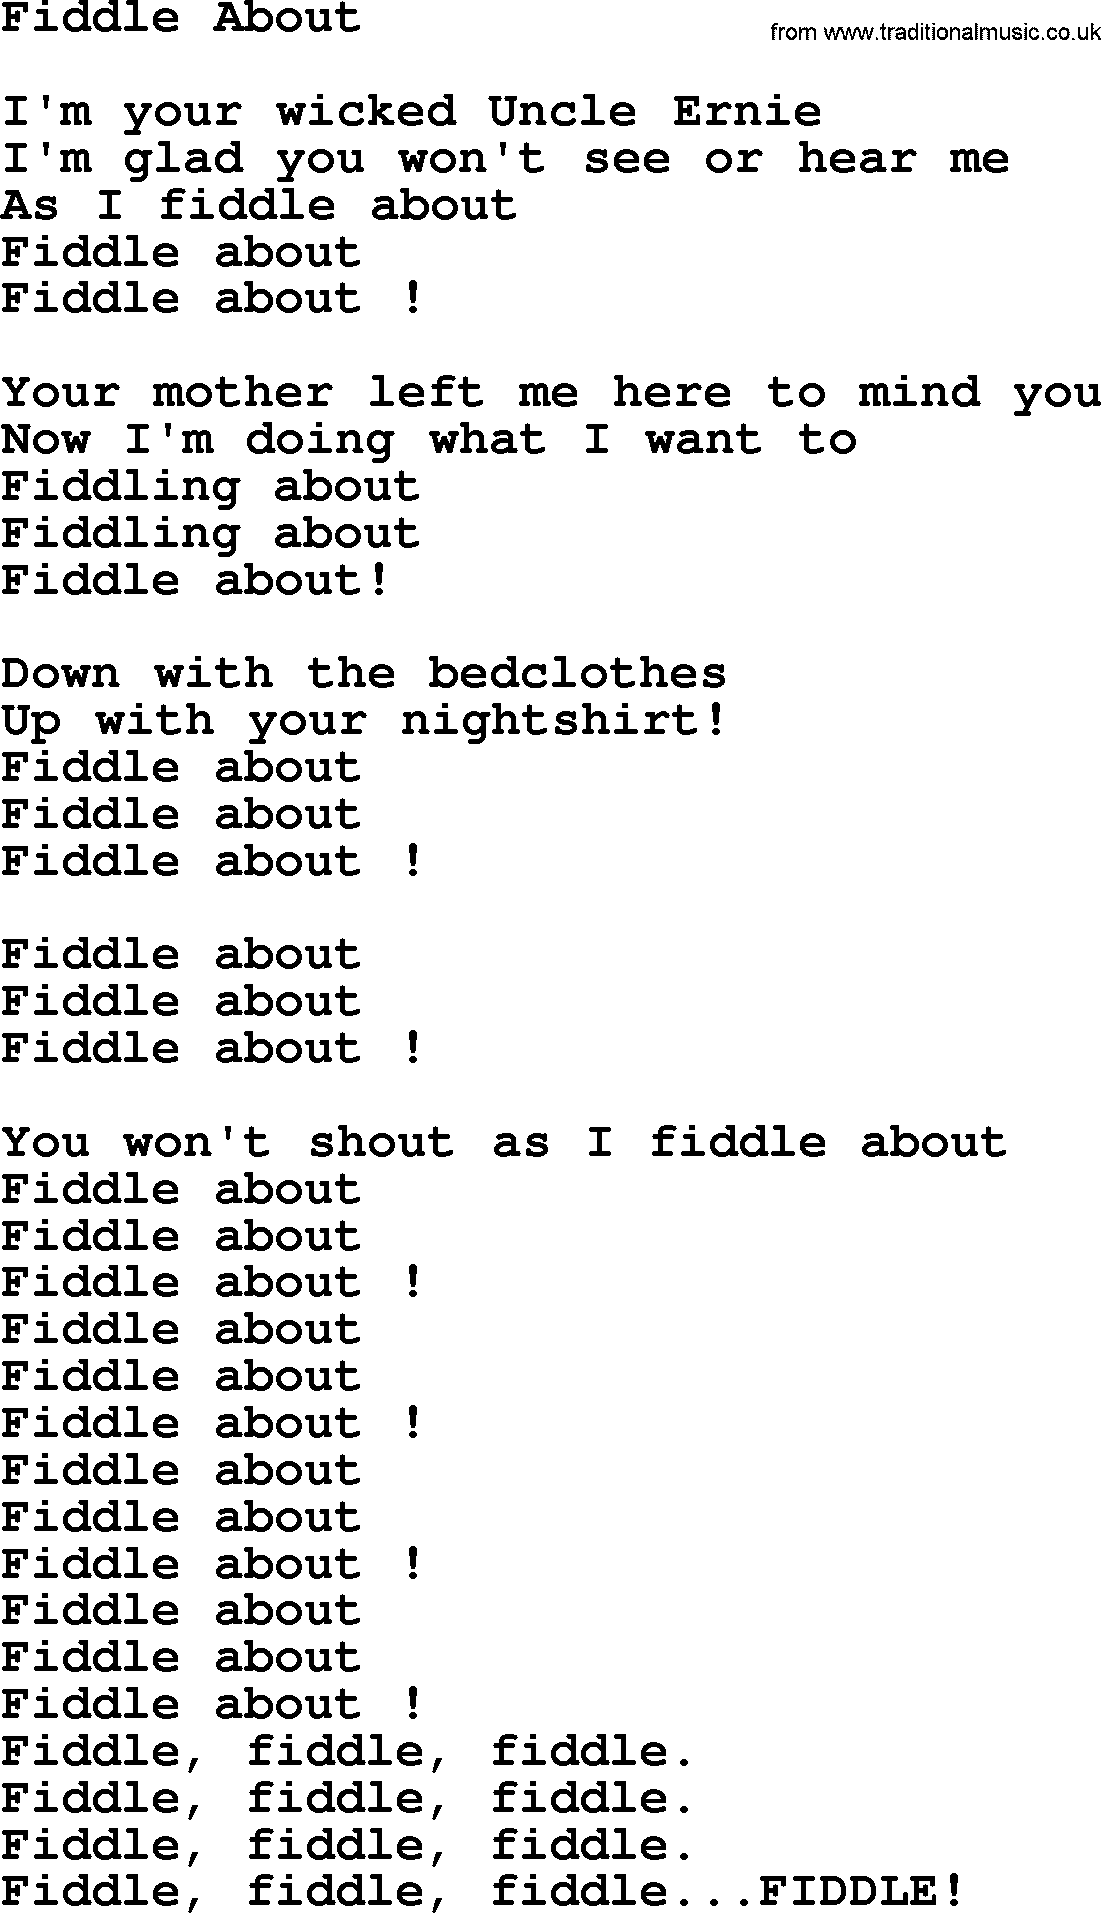 The Byrds song Fiddle About, lyrics